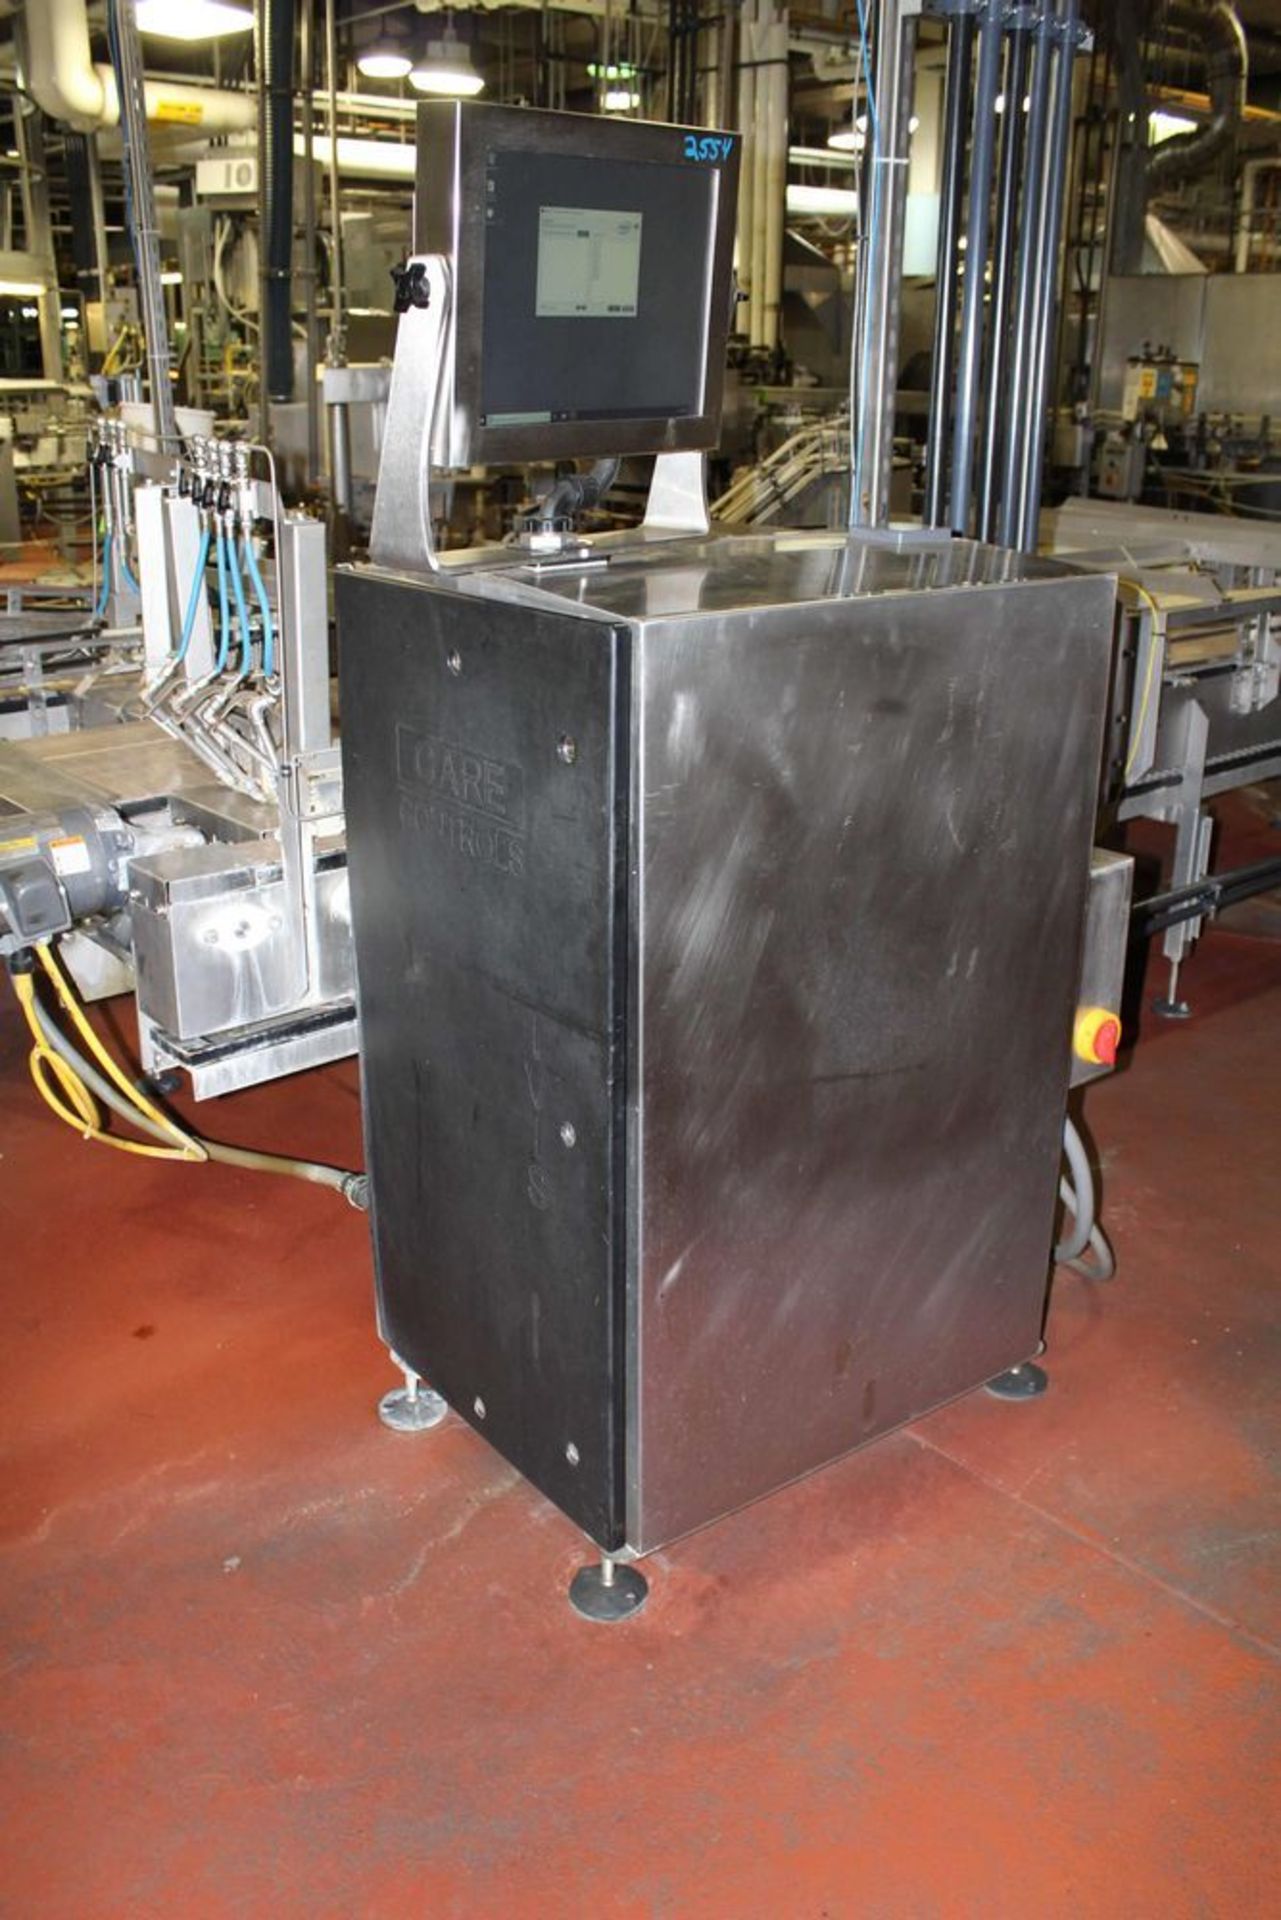 Care Controls Label Inspection System - Image 2 of 3